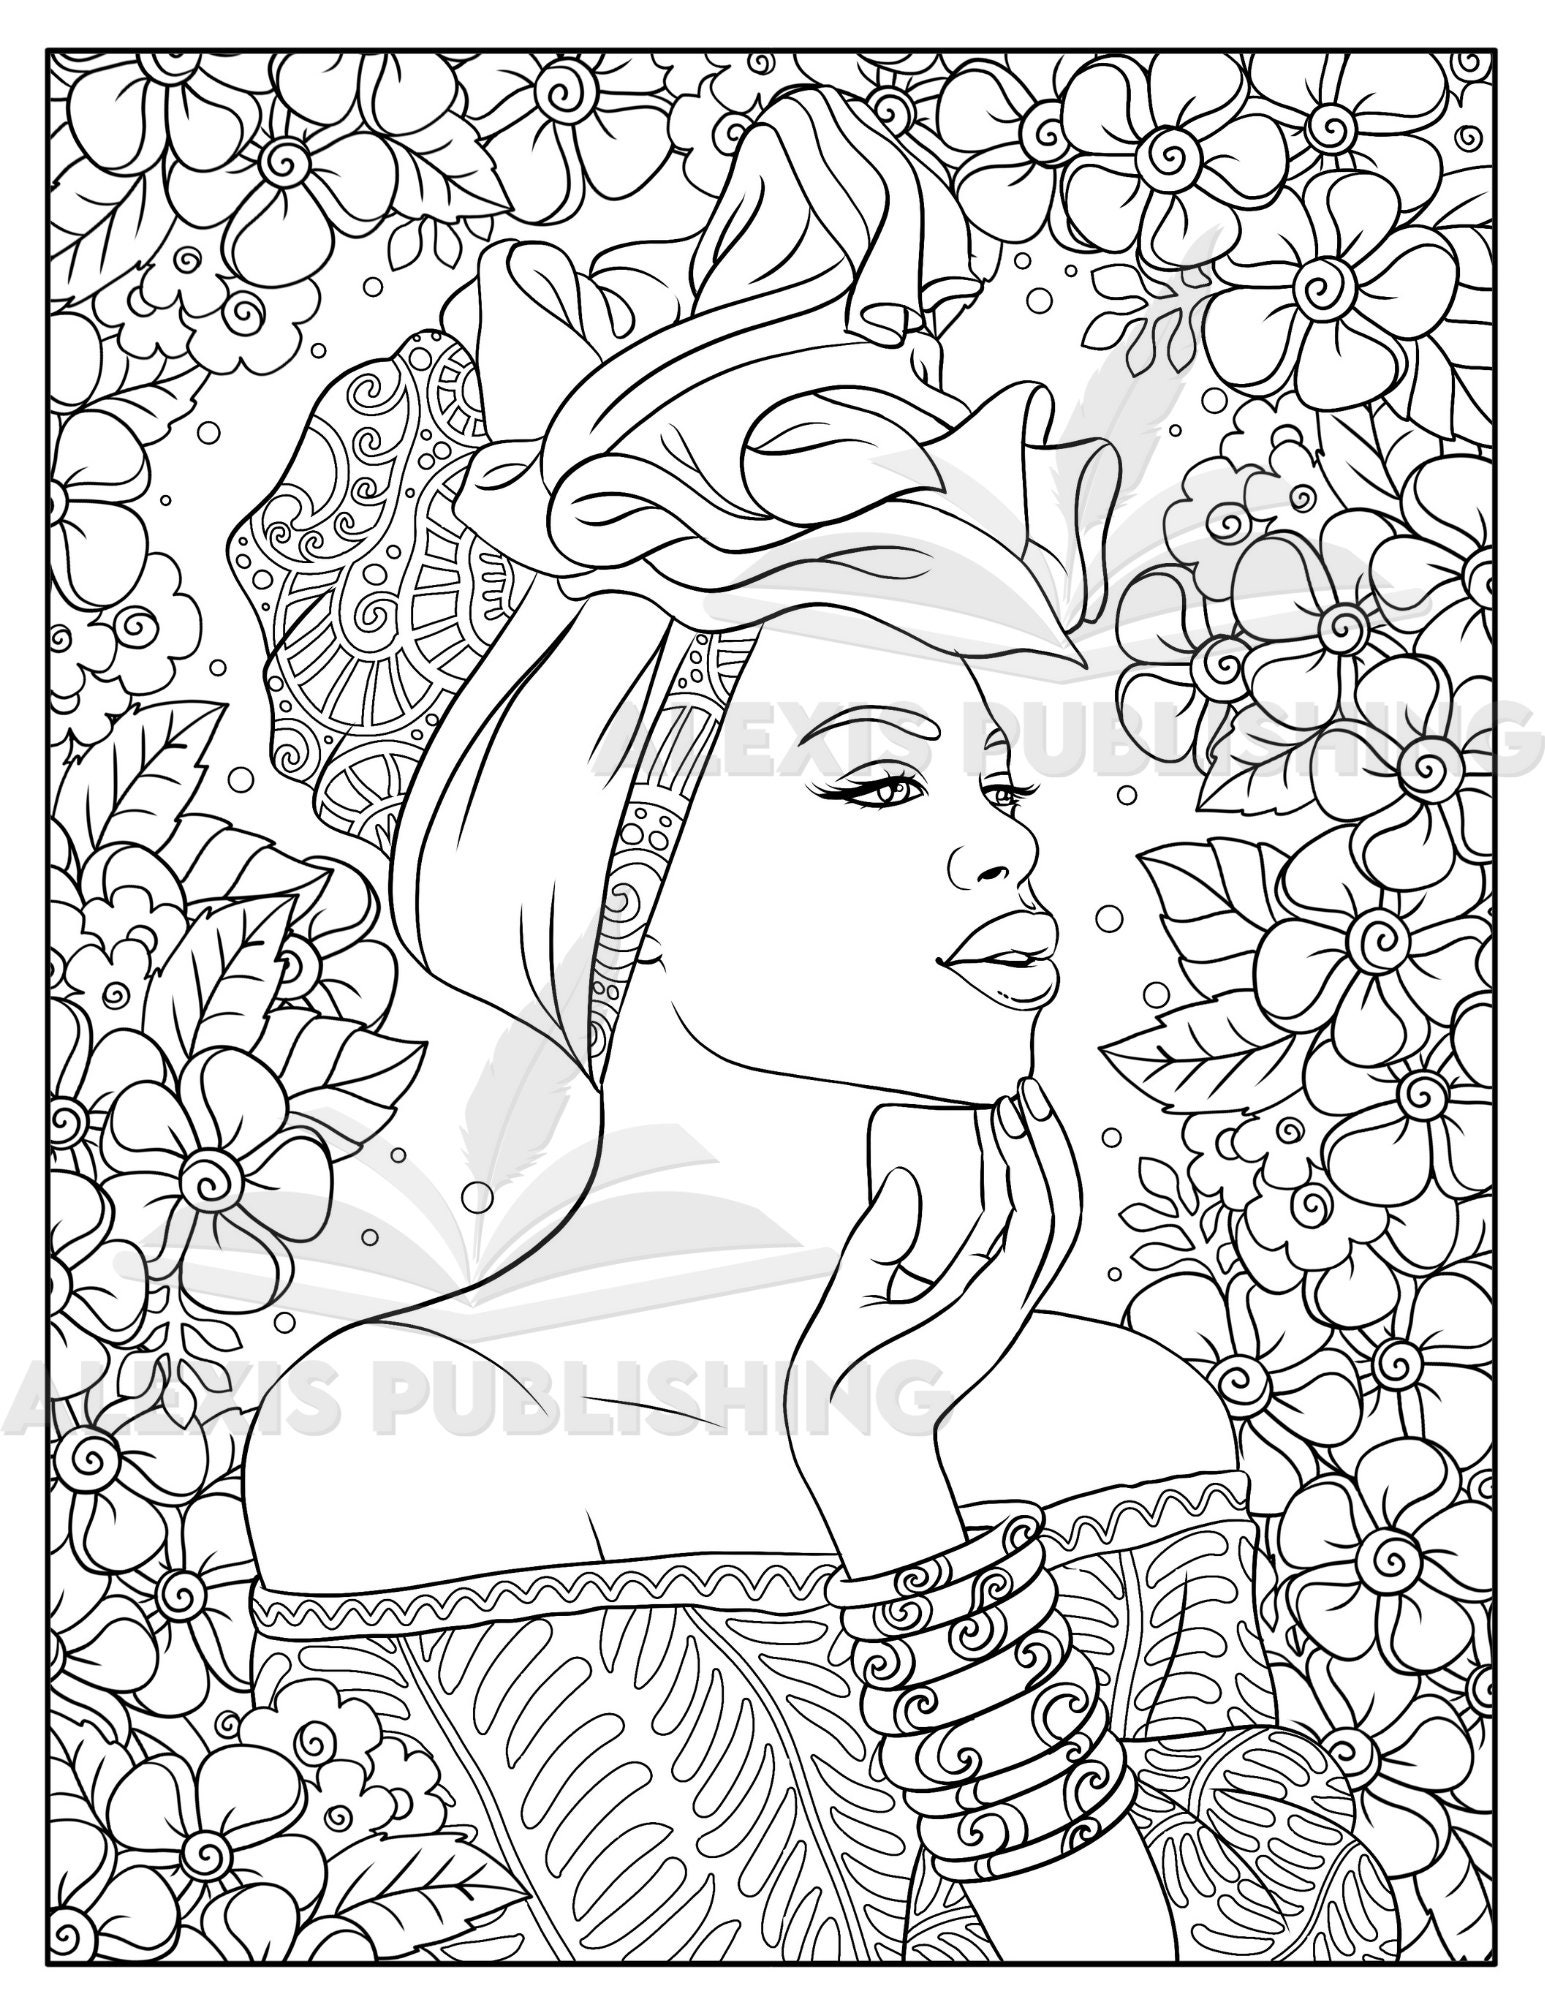 Black Girls Coloring Pages For Adults: Cute Black Girls Hairstyles African  American Coloring Books For Adults Stress Relief And Relaxation :  Publishing, Lydia: : Books